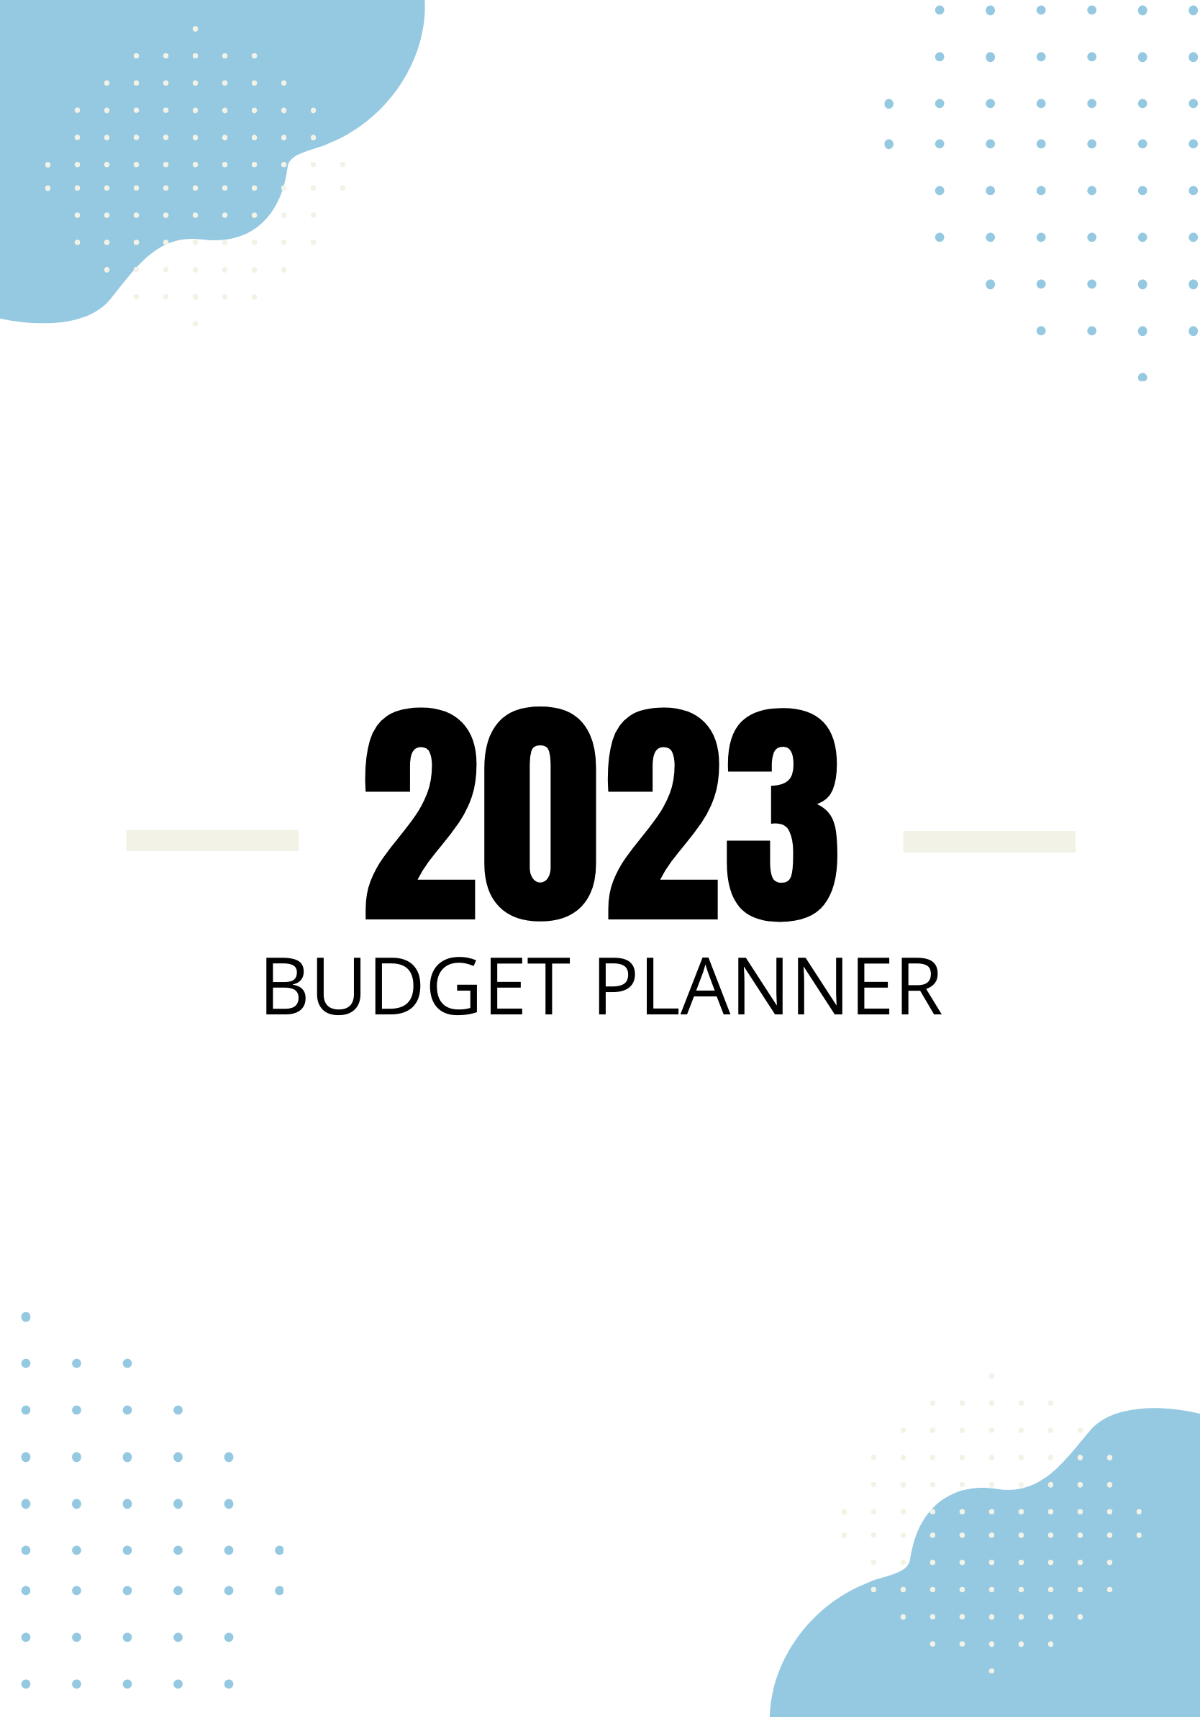 Free 2023 Budget Planner Template